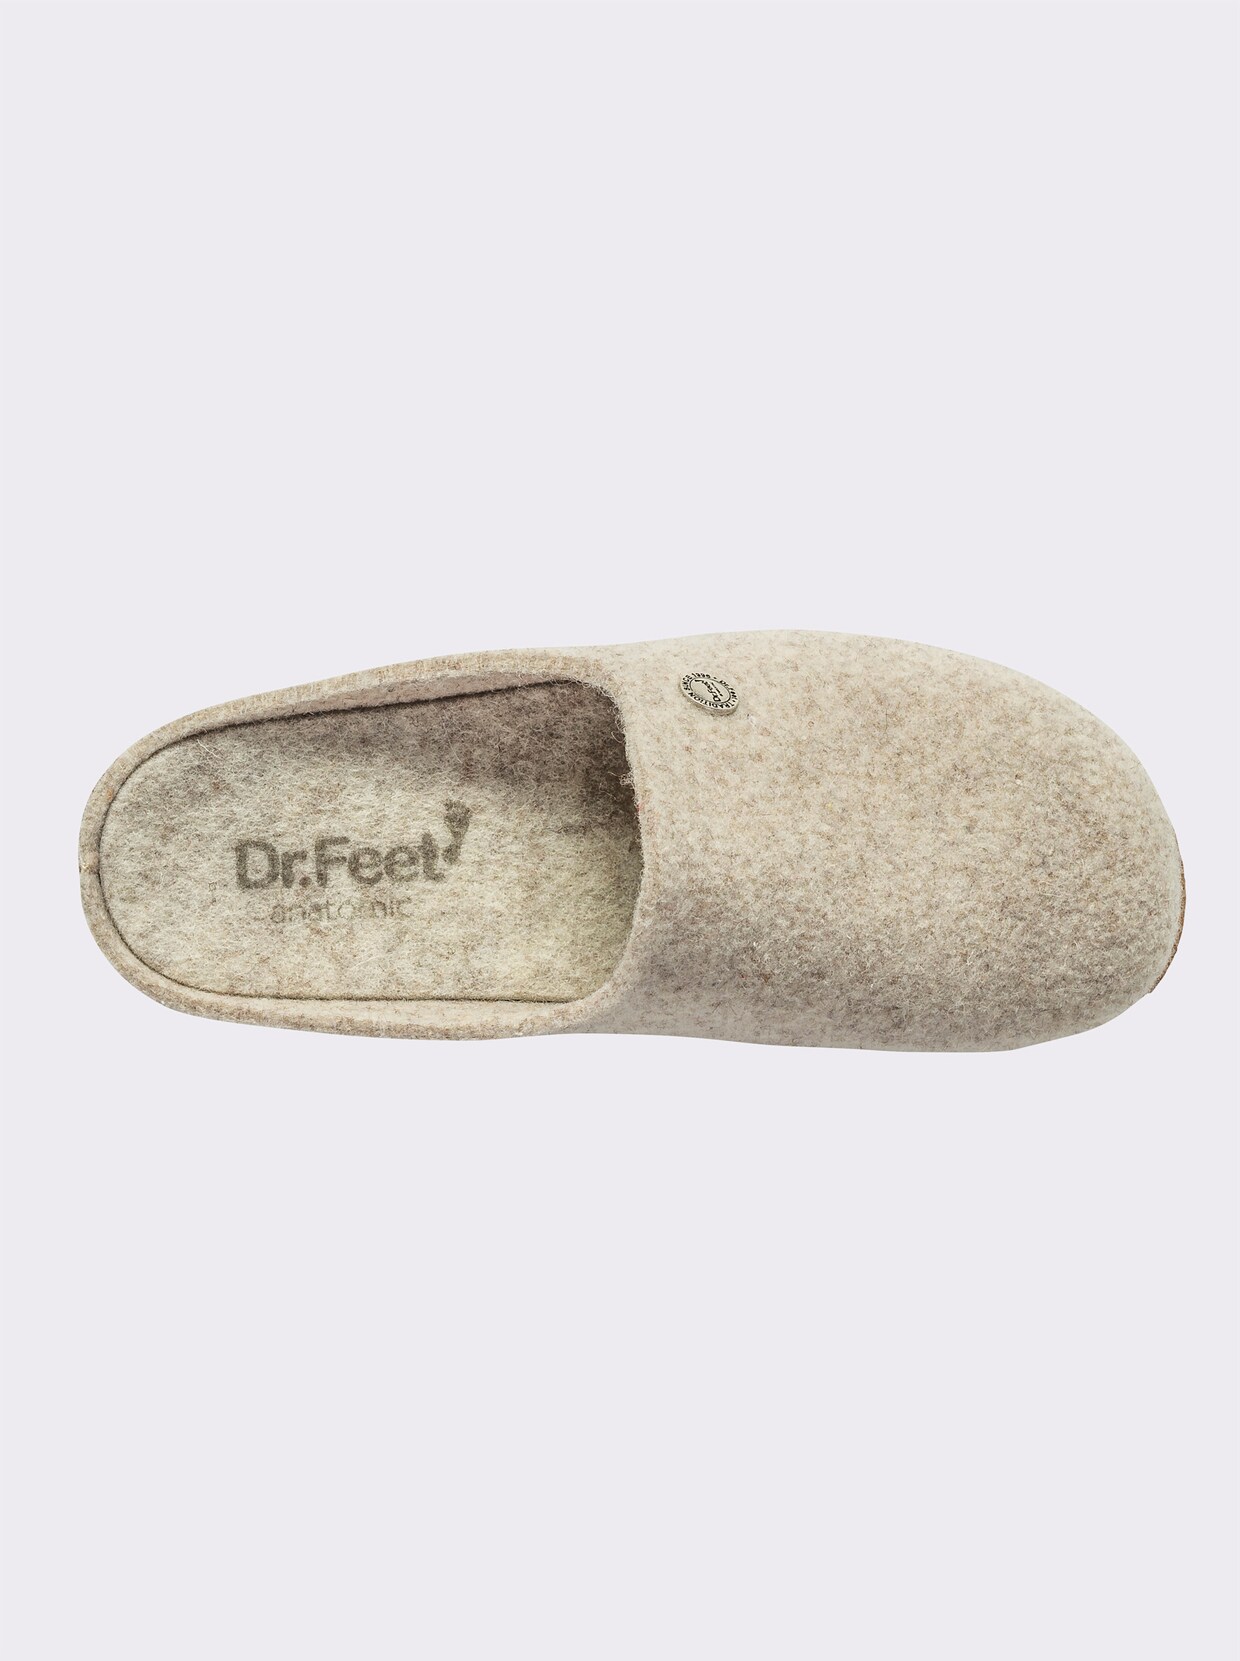 Dr. Feet Slippers - offwhite